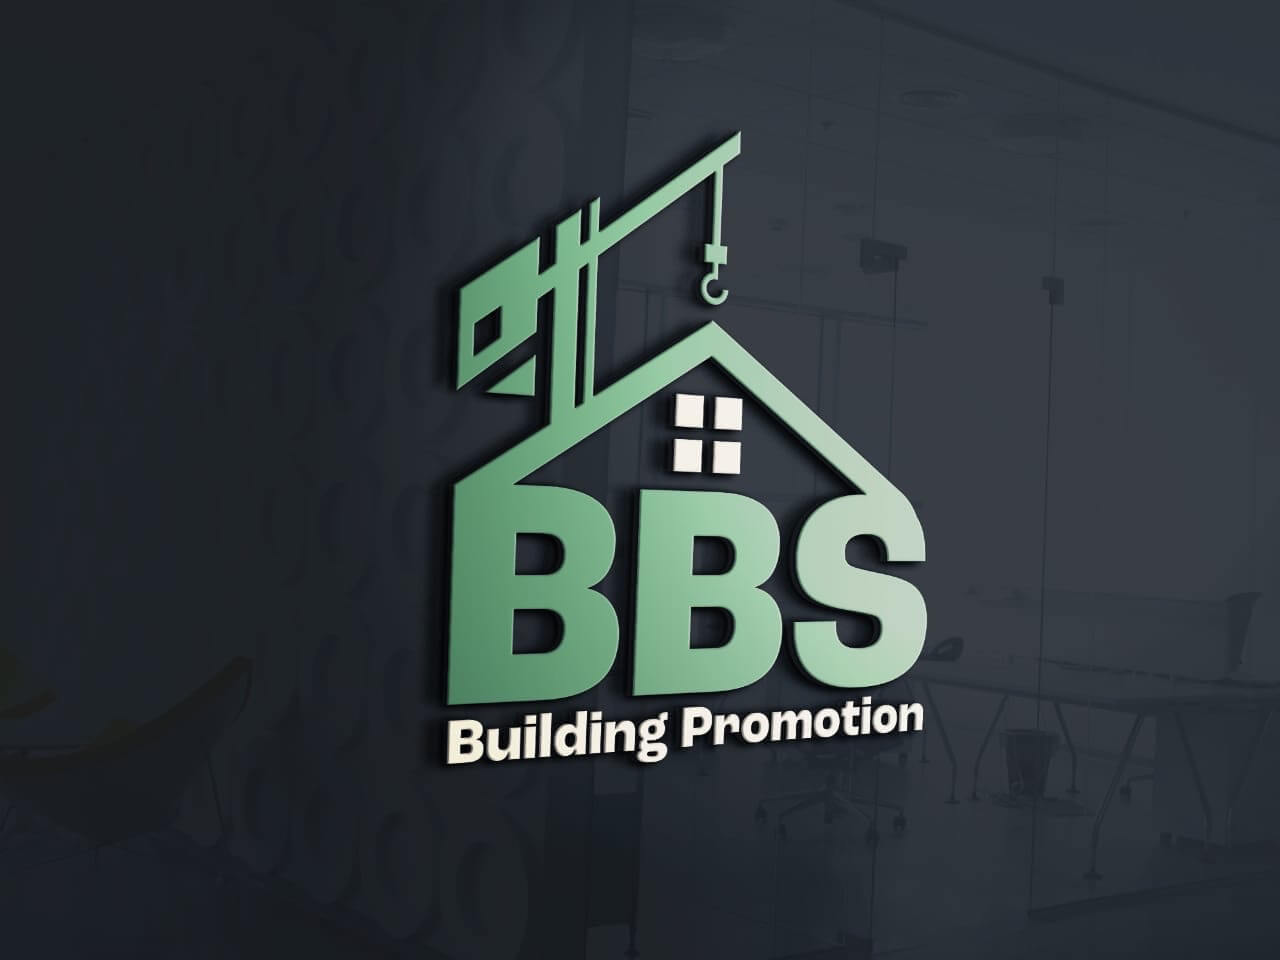 BBS building promotion